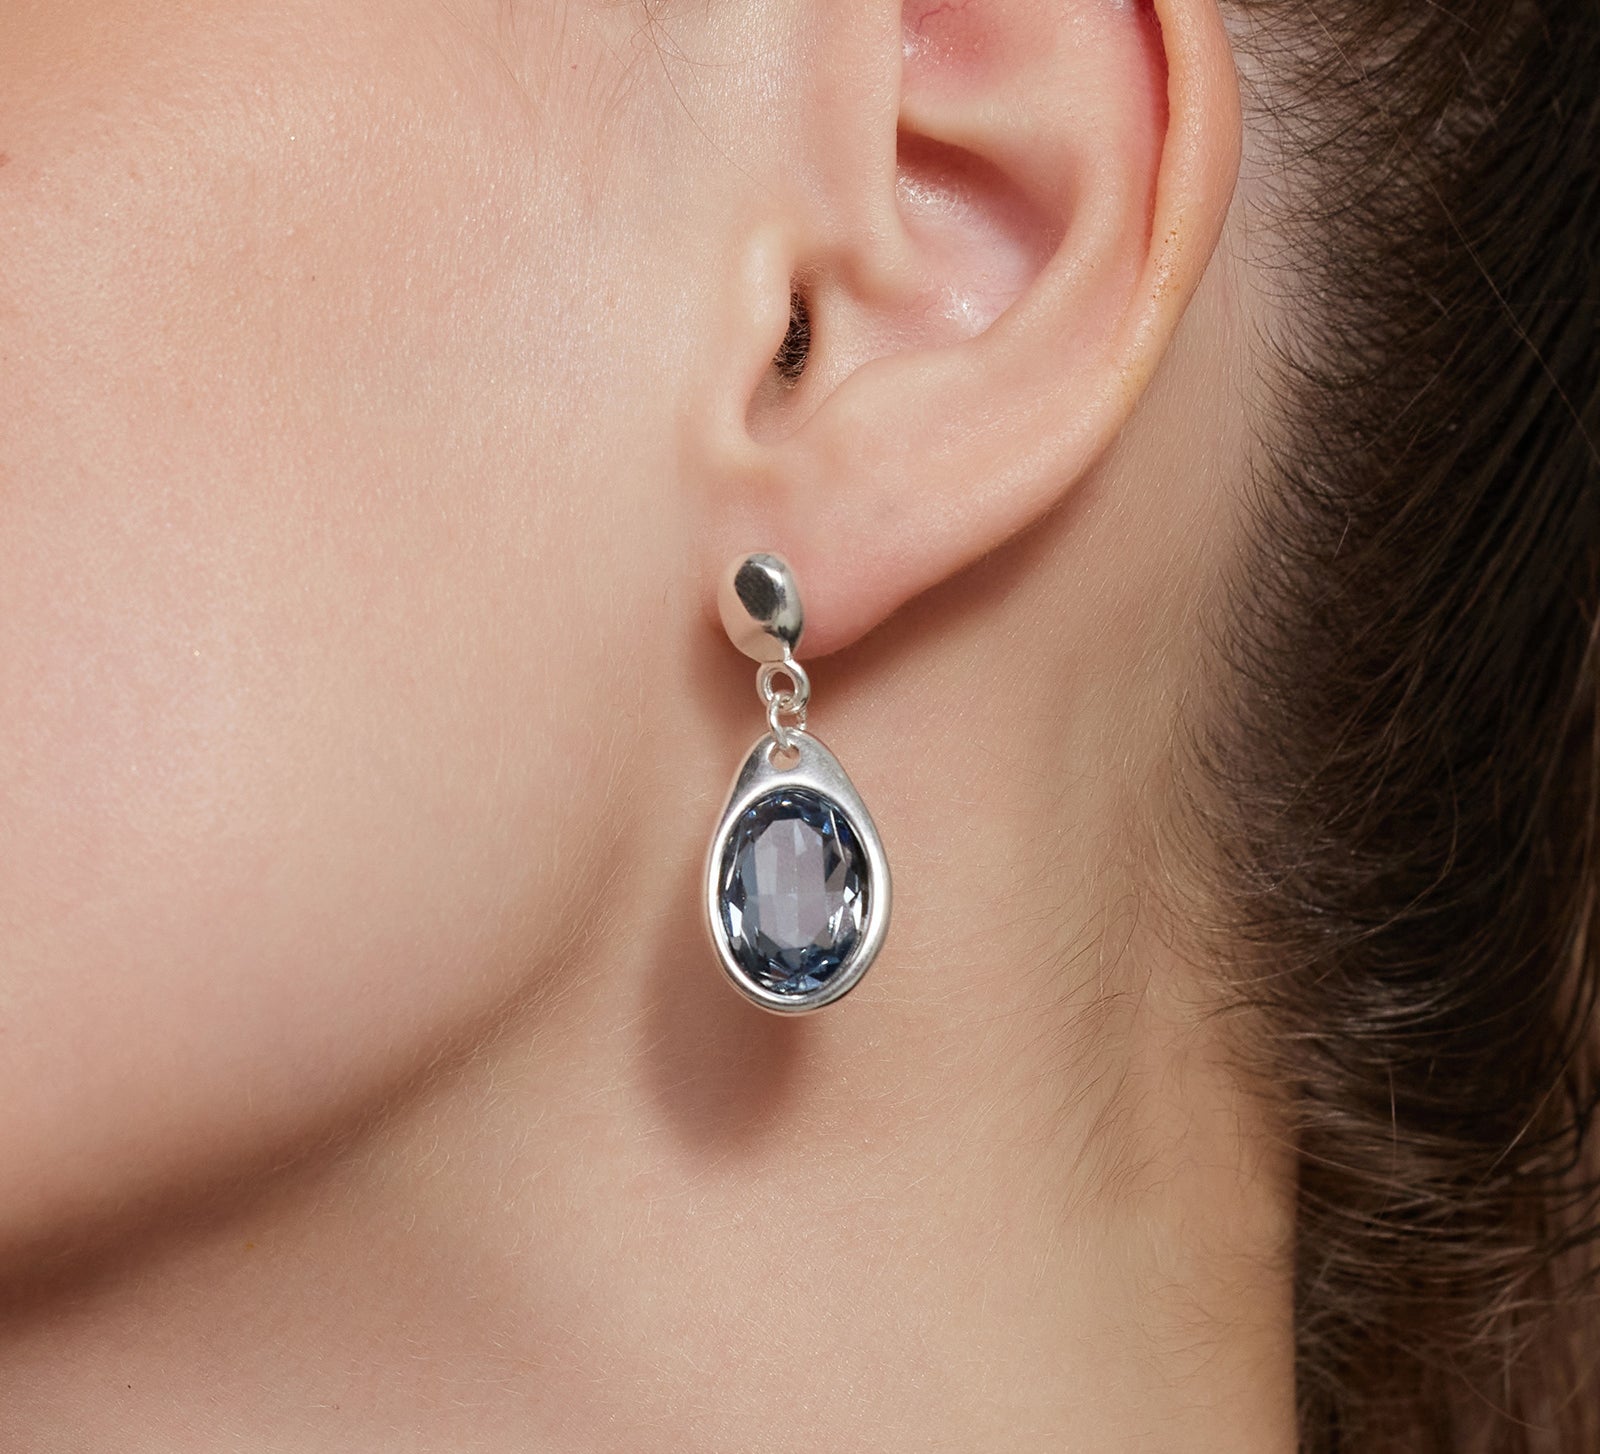 Large Dove Grey Crystal Drop Hoops with a cascade of crystals, these earrings bring a glamorous and sparkling element to your ensemble, making a bold fashion statement